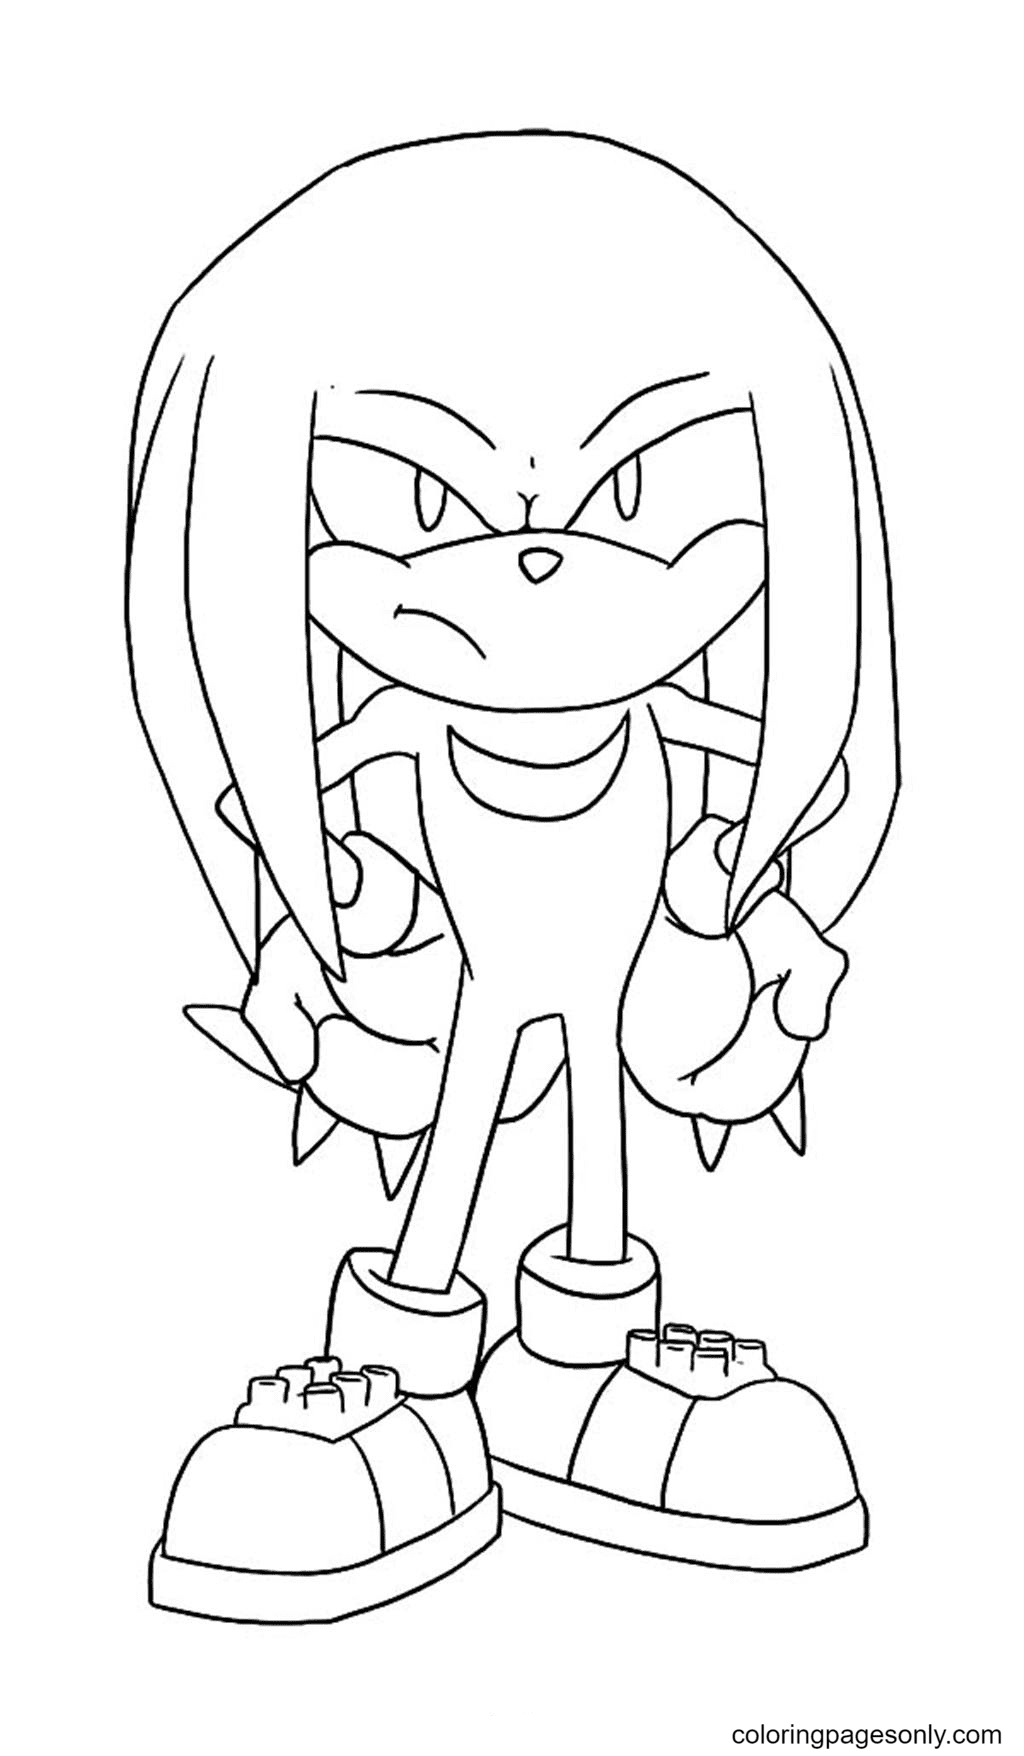 Knuckles Angry Coloring Page